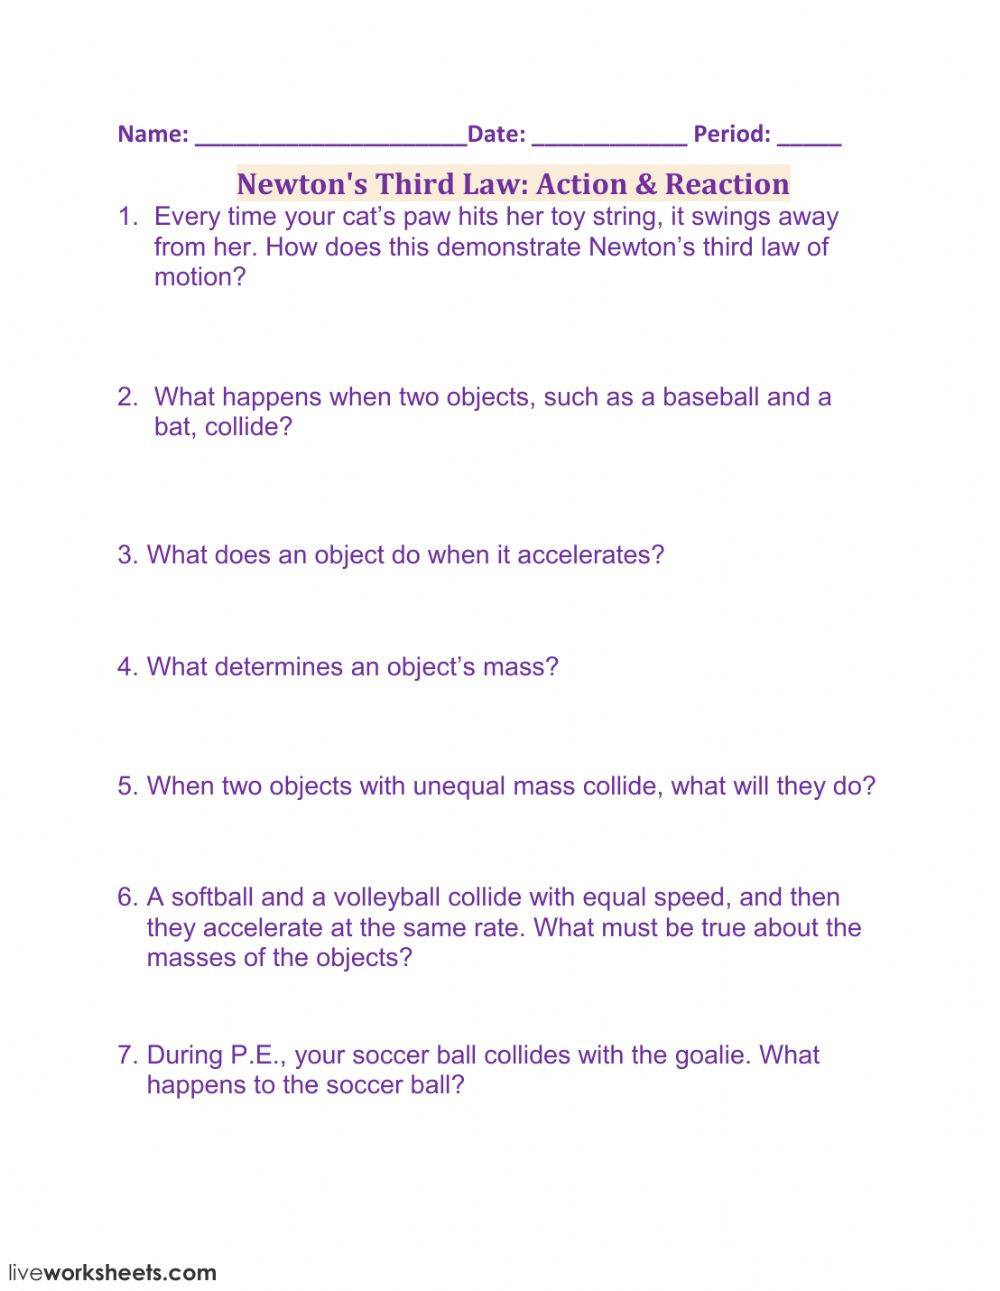 Newton039s Second Law Worksheet Inertia and Mass Worksheet Answers Nidecmege